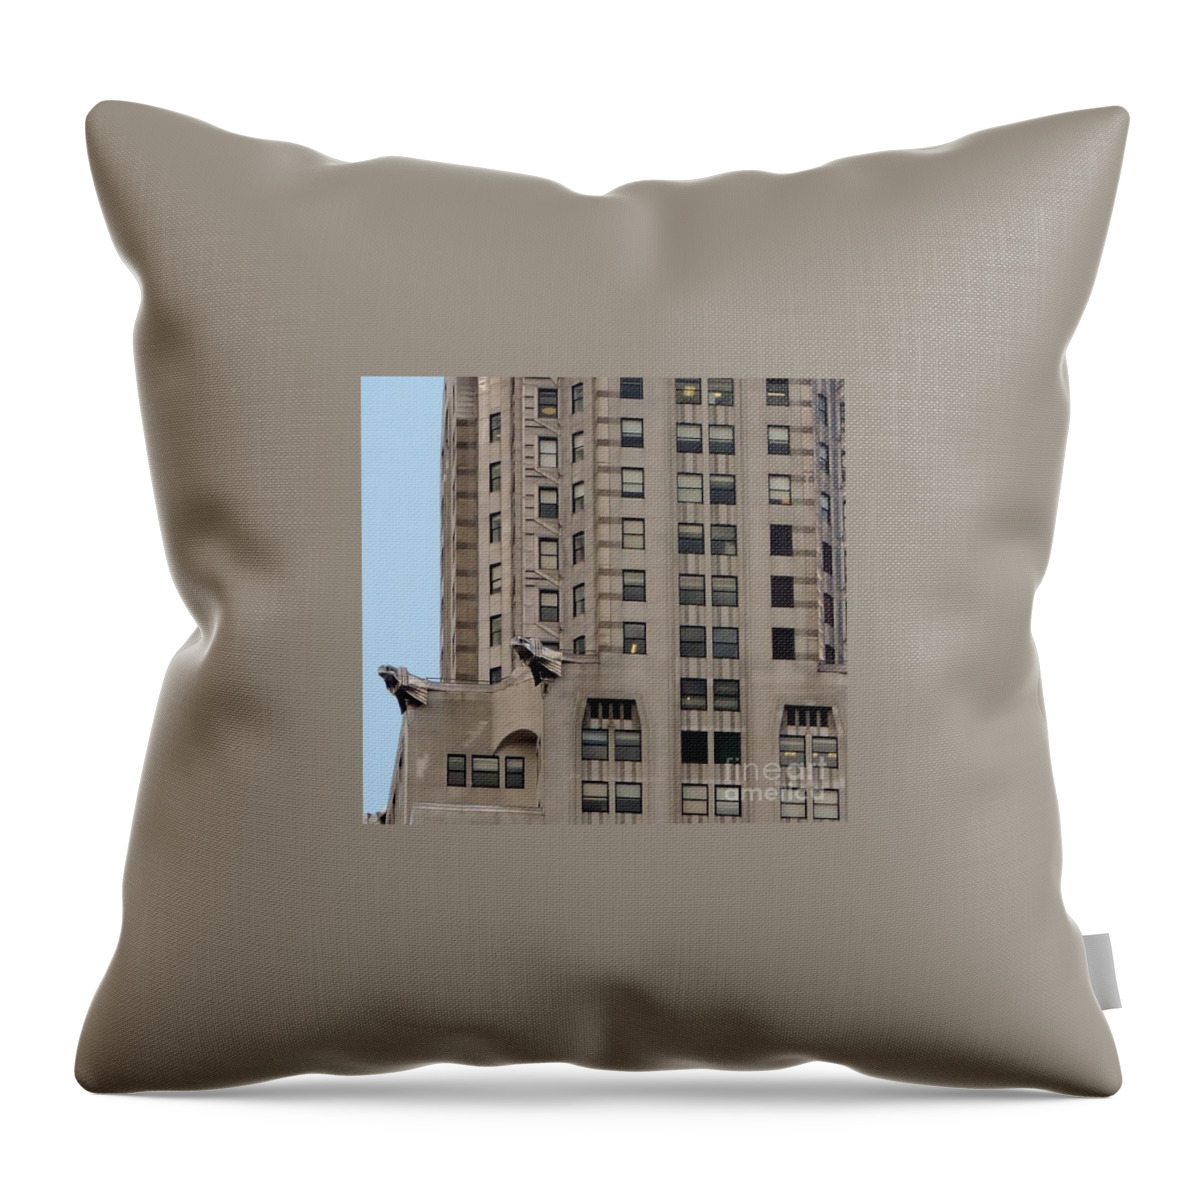 Architectural Buildings Throw Pillow featuring the photograph Chrysler Building Corner NYC by Susan Garren